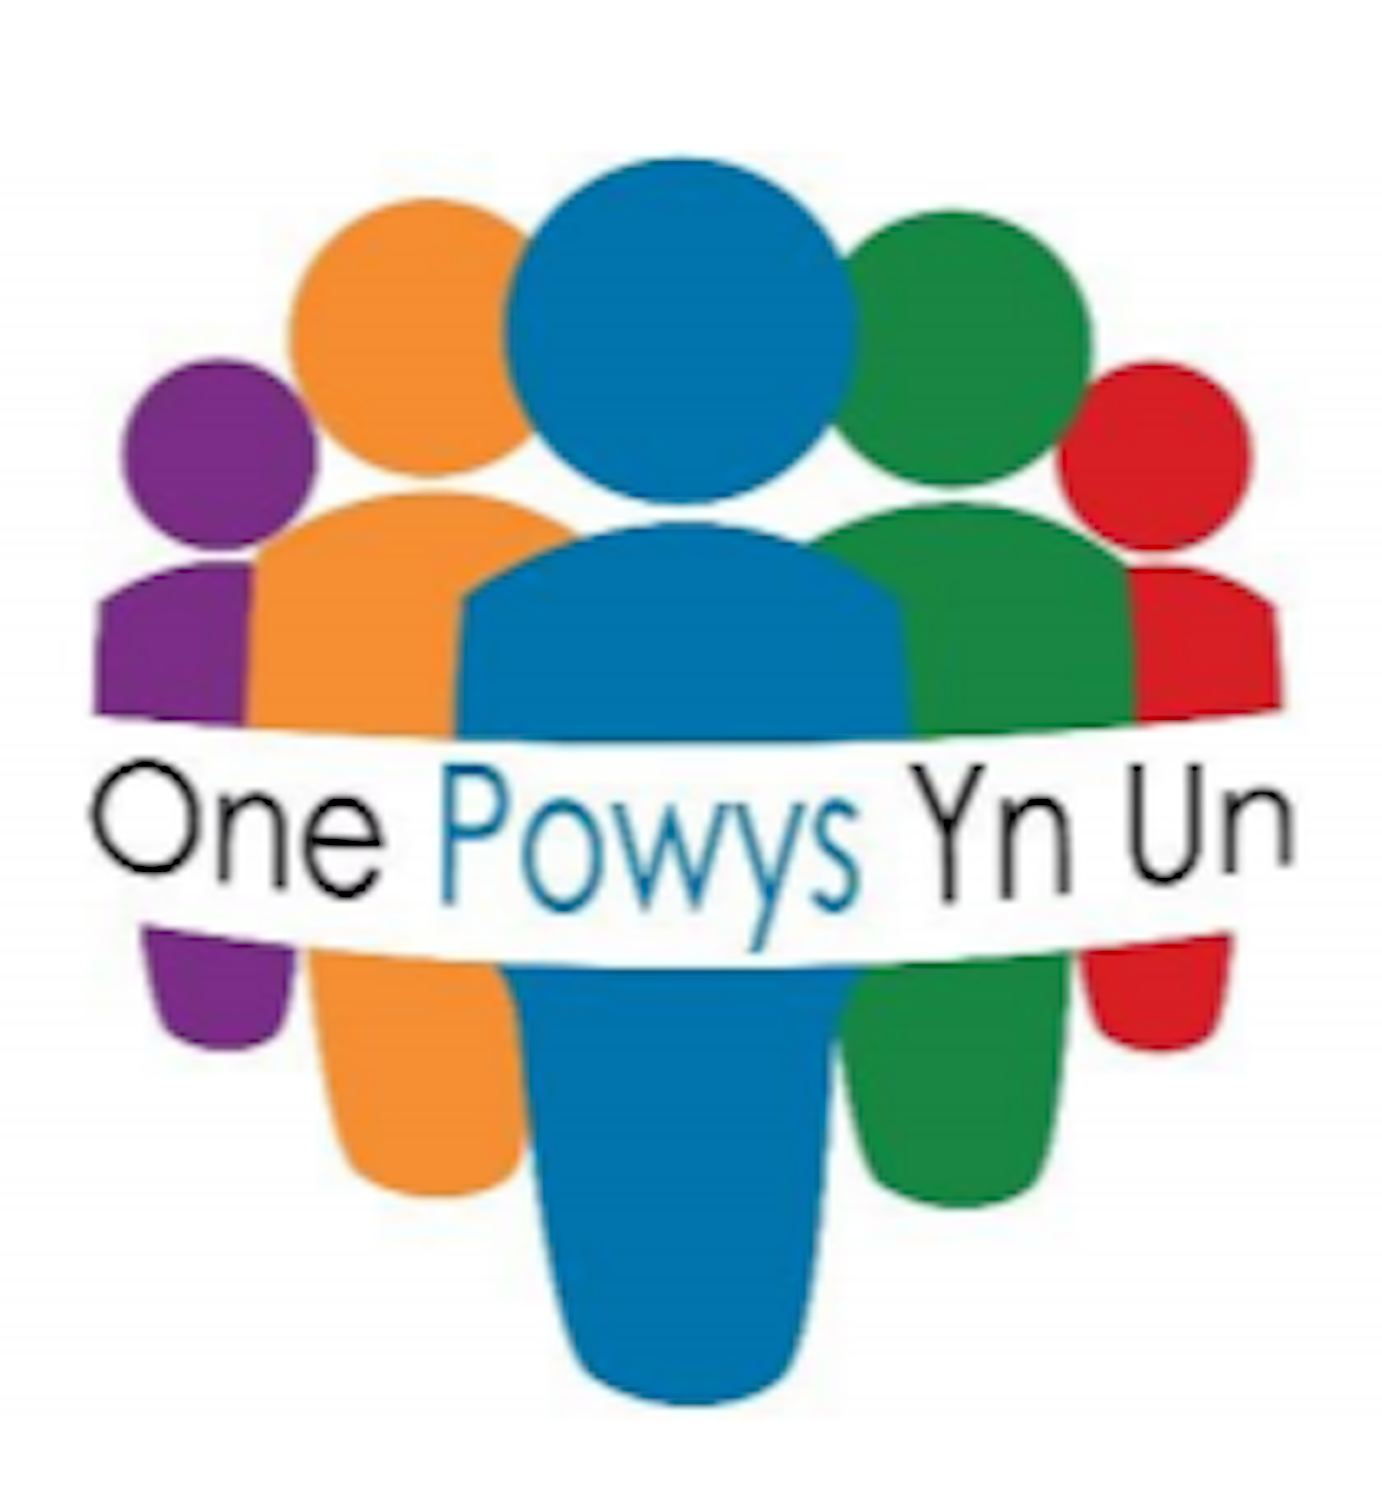 Have Your Say Powys